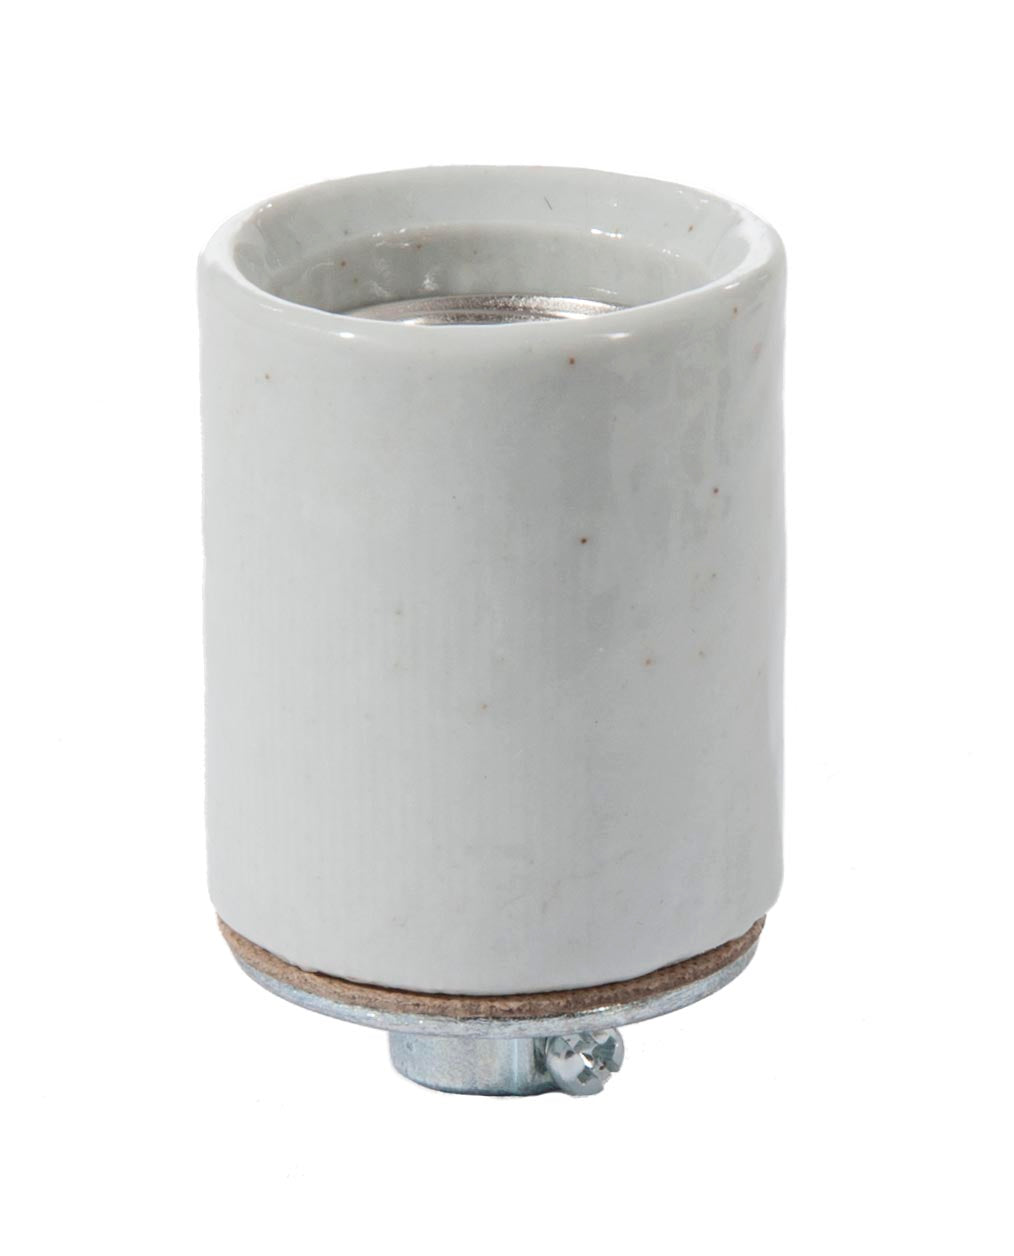 E26 Medium Porcelain Lamp Socket with 1/8F metal cap and Easy Wire terminals, 250V, 660W (48305)